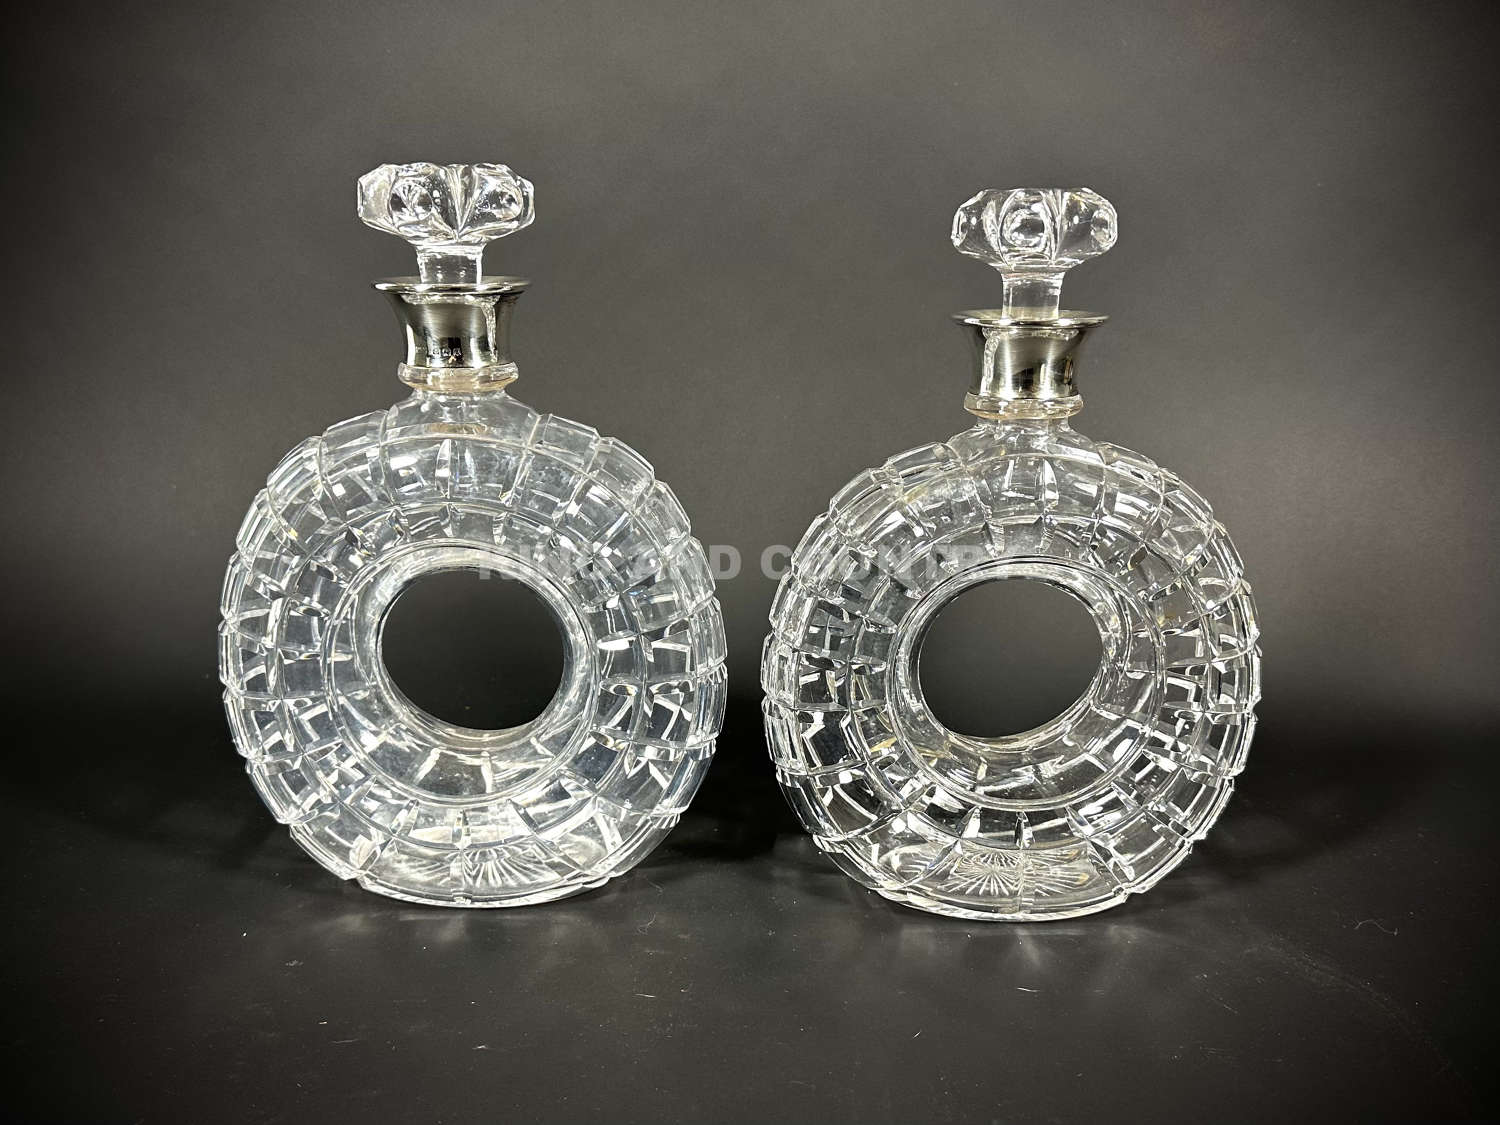 An Art Deco pair of Toroid / Car Wheel decanters by Mappin & Webb